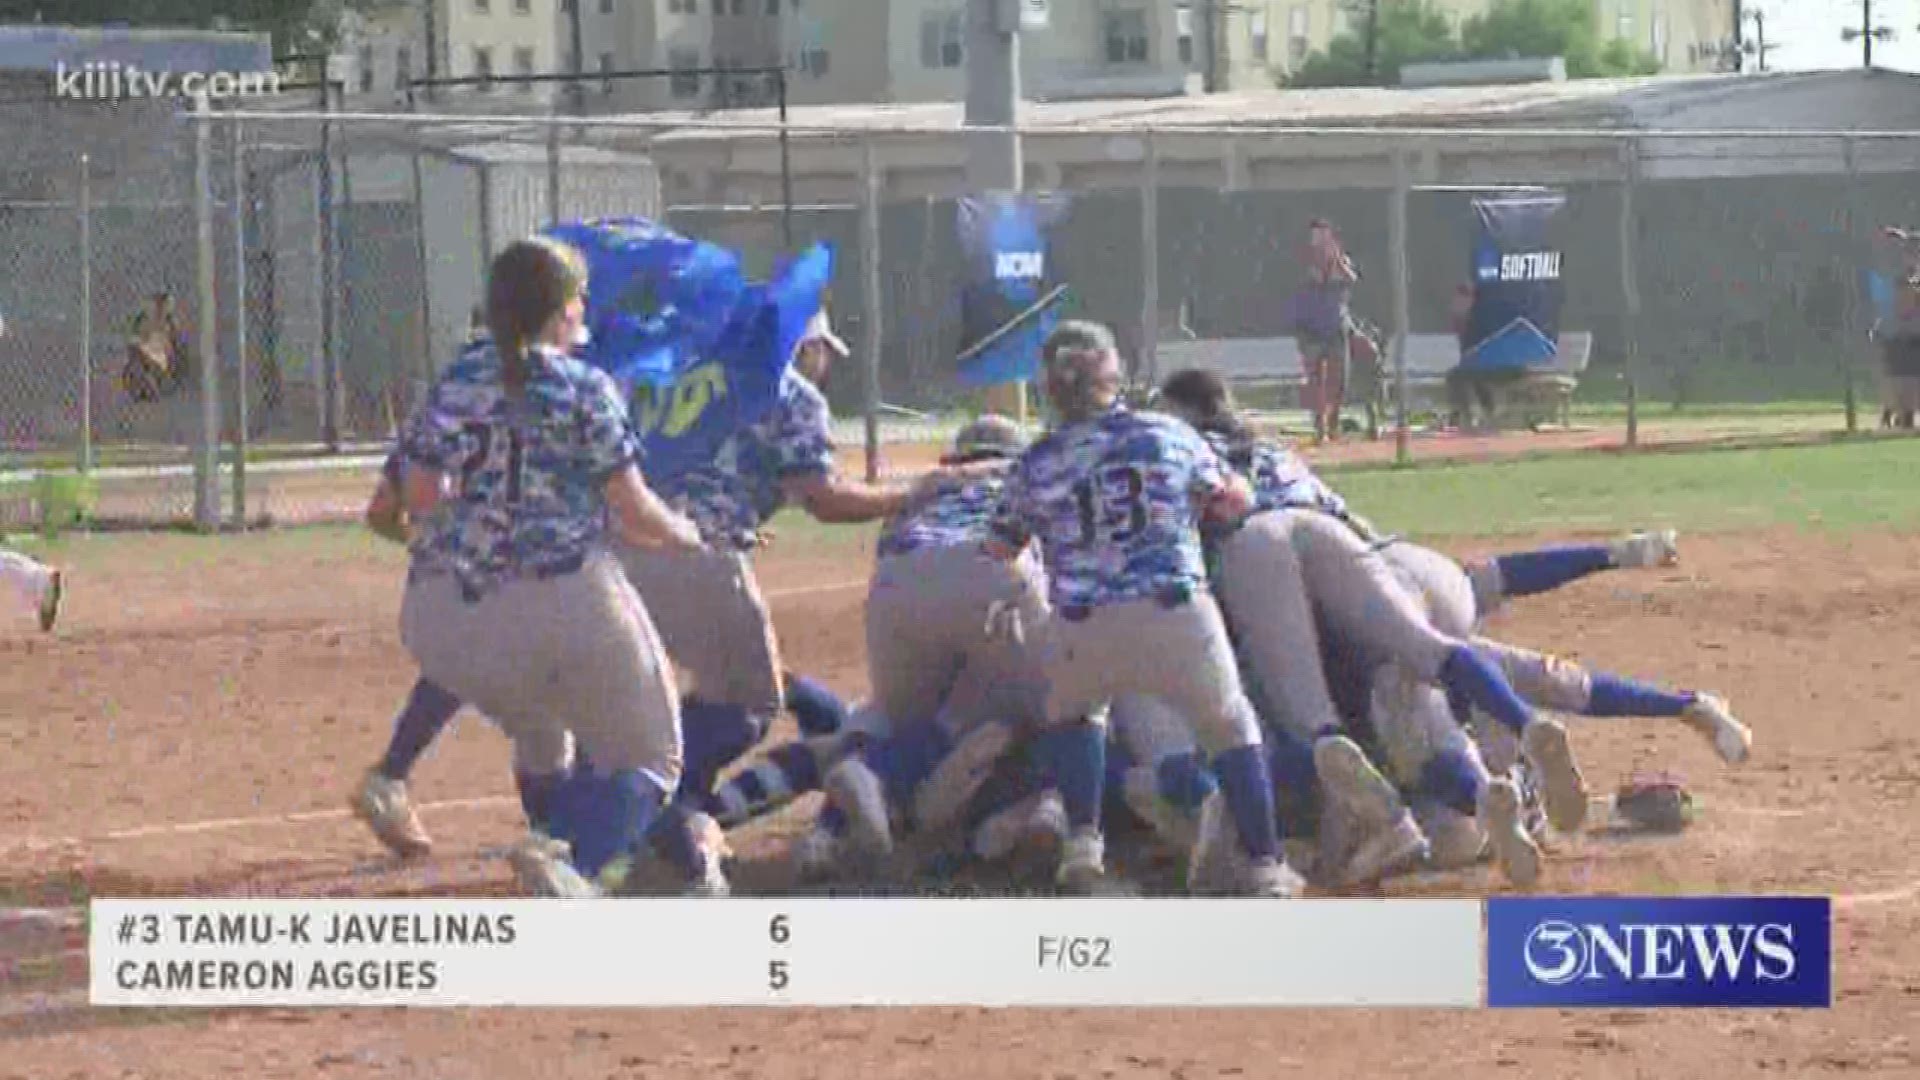 Texas A&M-Kingsville softball sweeps it's Super Regional matchup with Cameron winning game two of the series 6-5, punching the Javelinas ticket to the Women's College World Series.